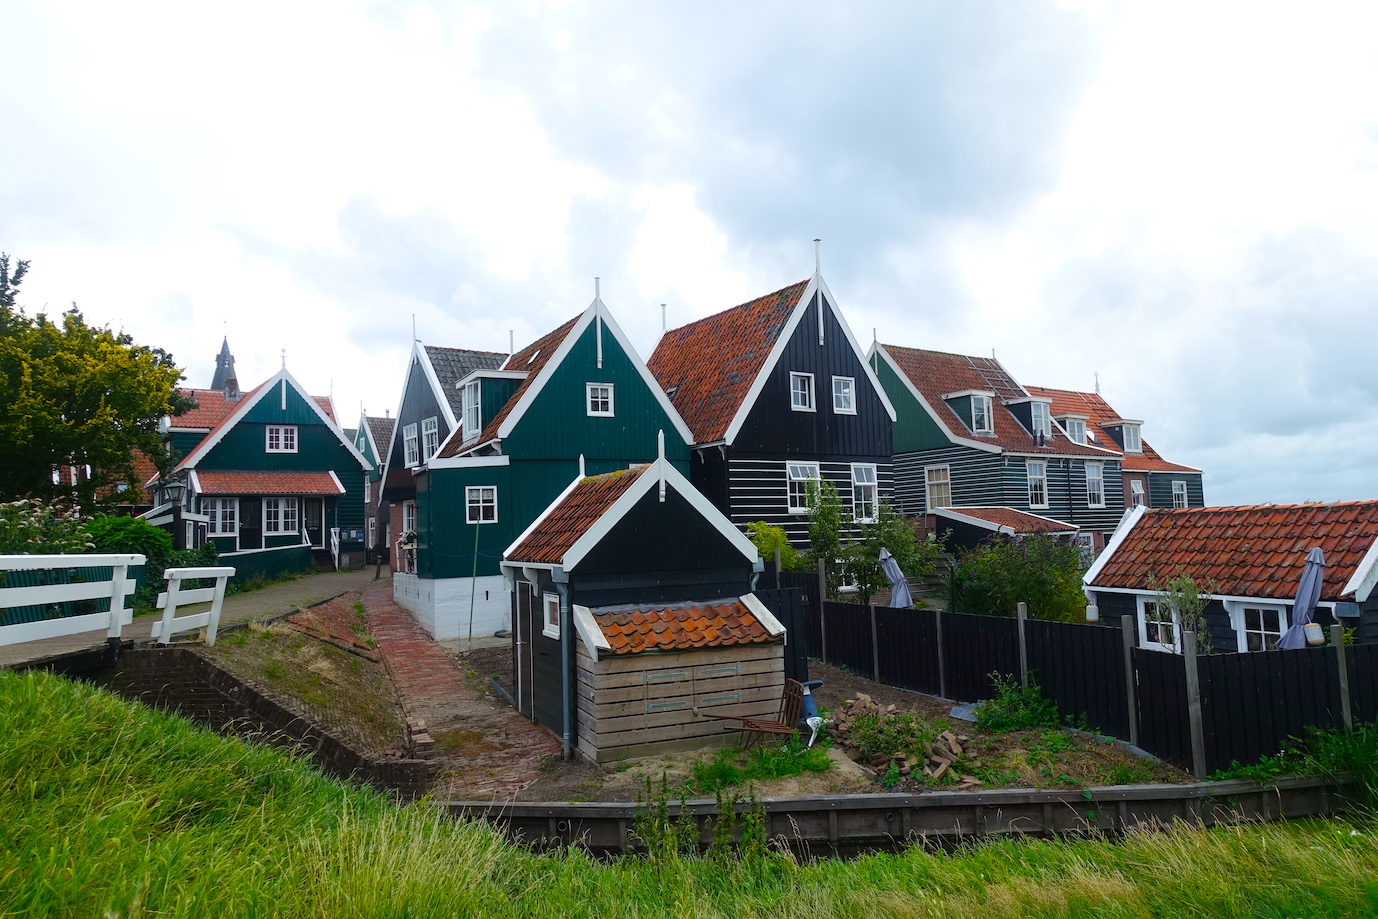 A view of the Marken houses in perspective